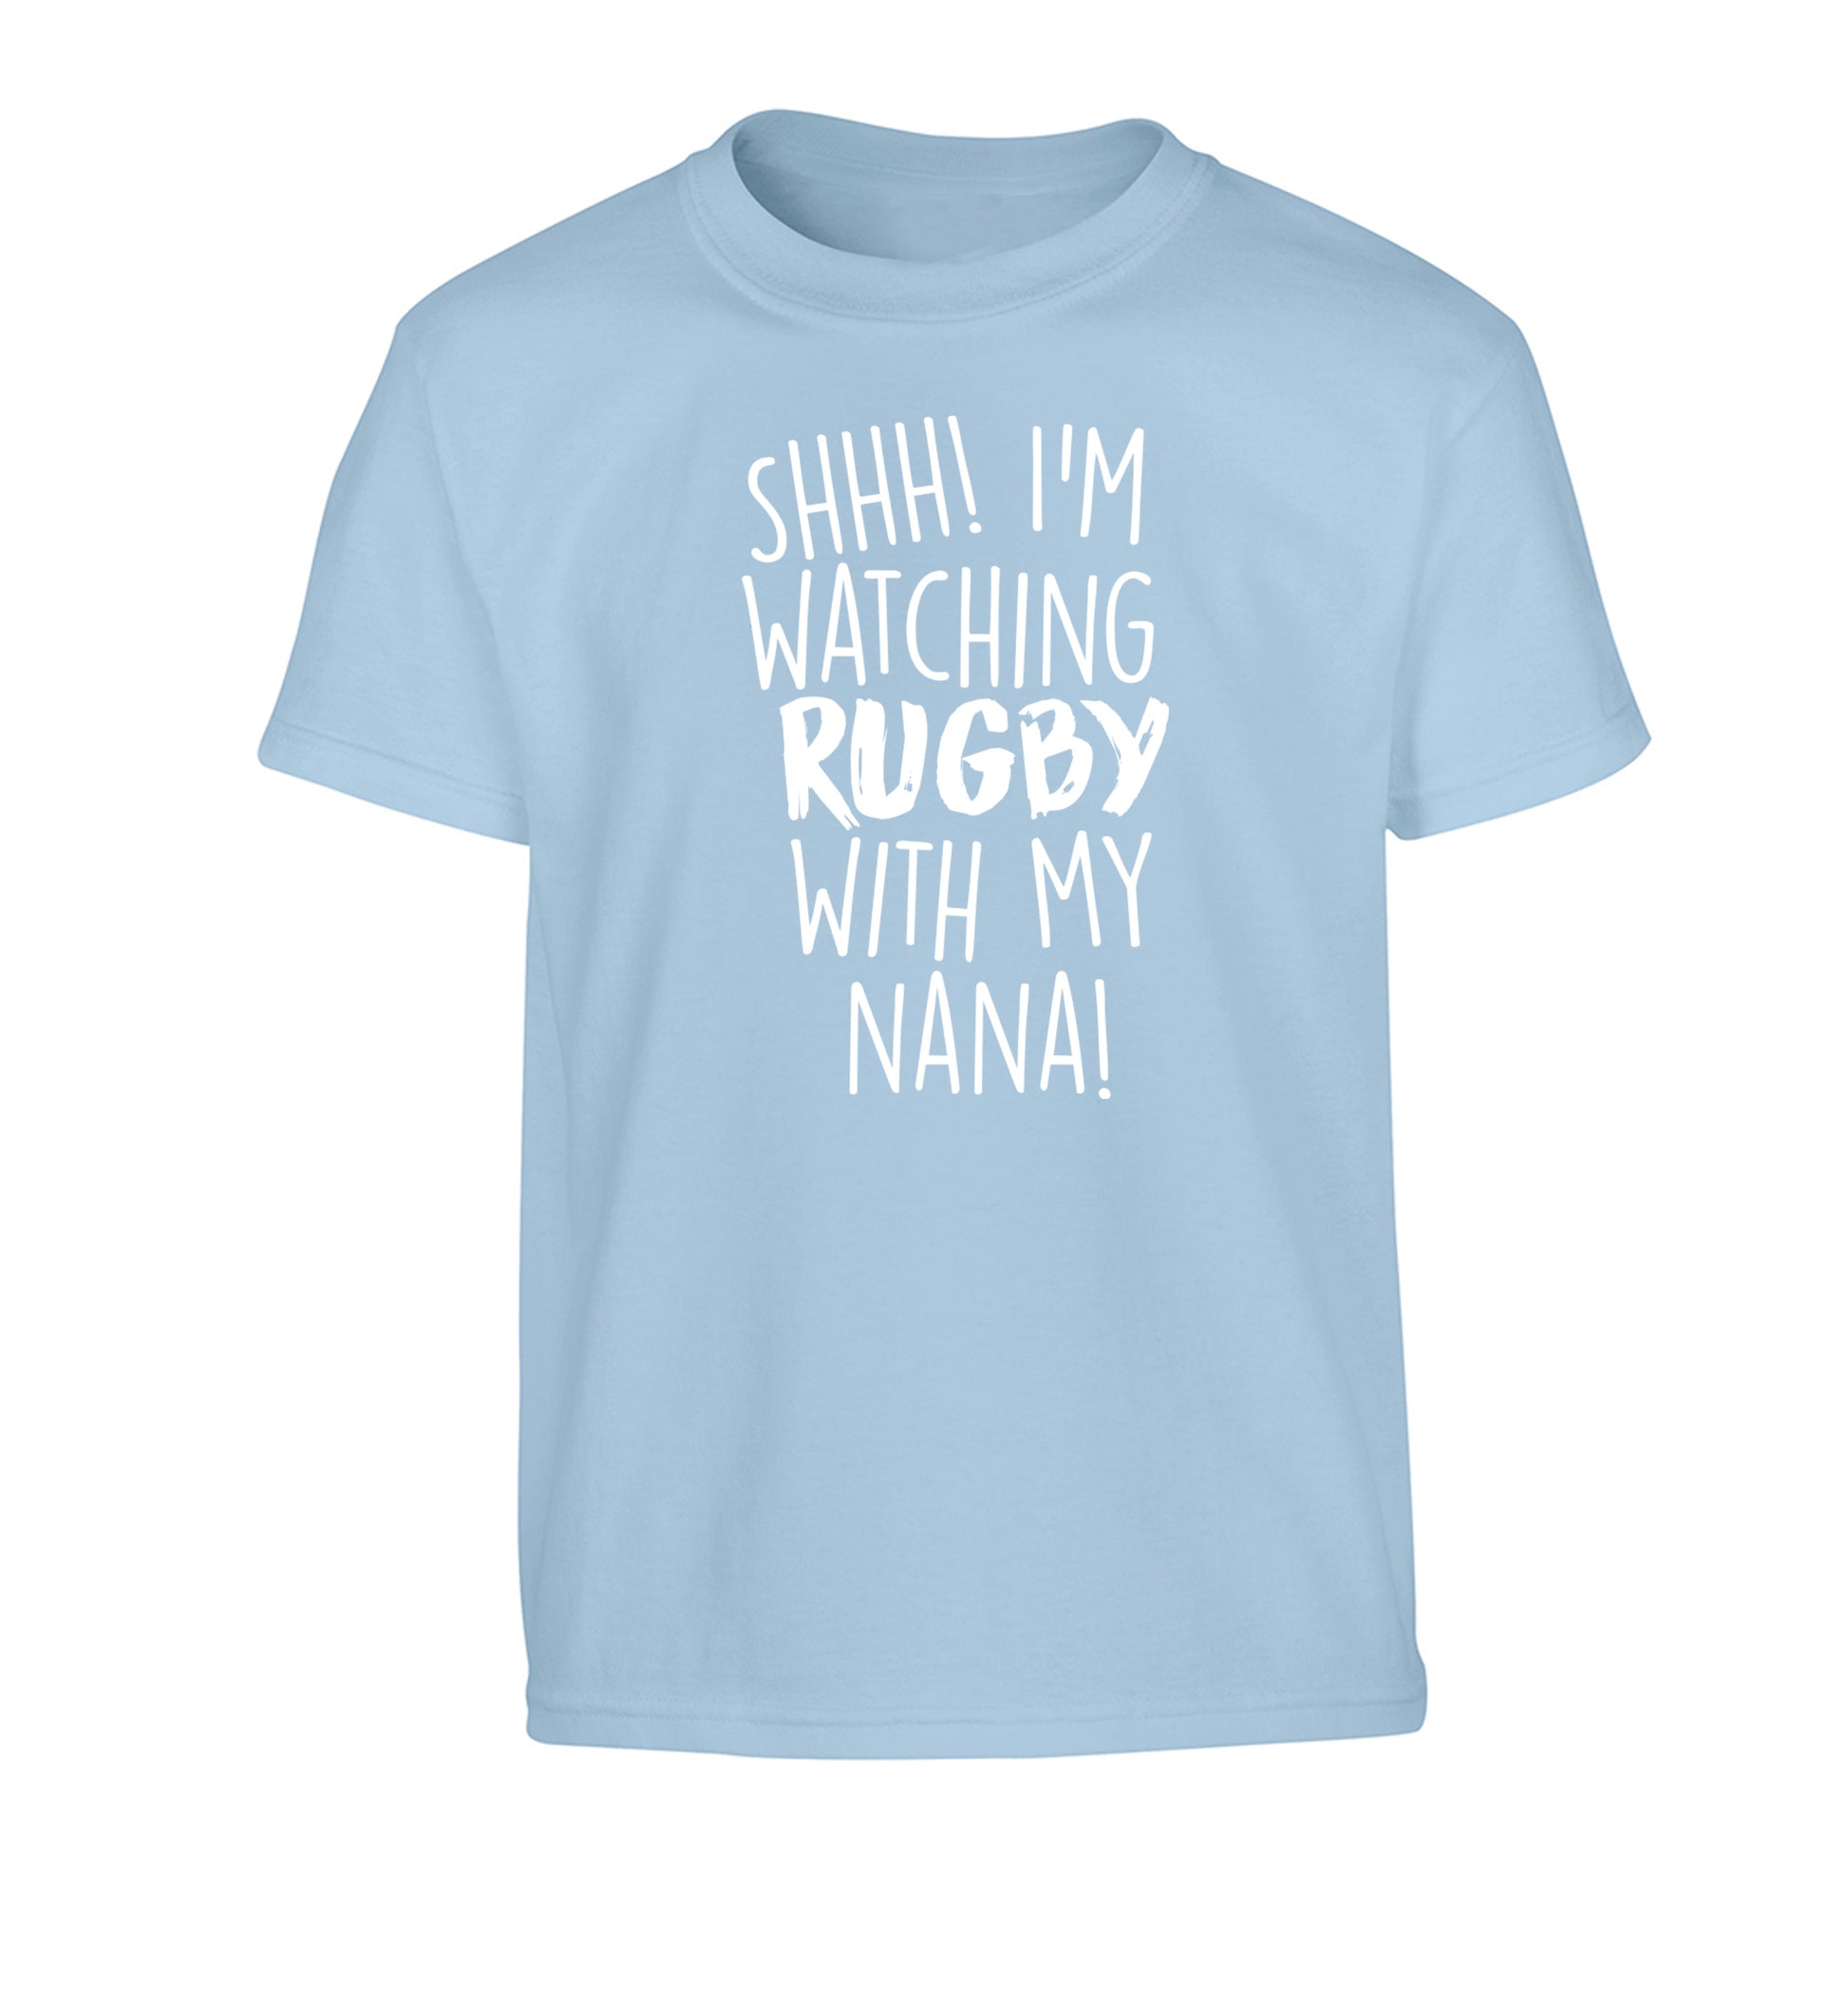 Shh I'm watching rugby with my nana Children's light blue Tshirt 12-13 Years